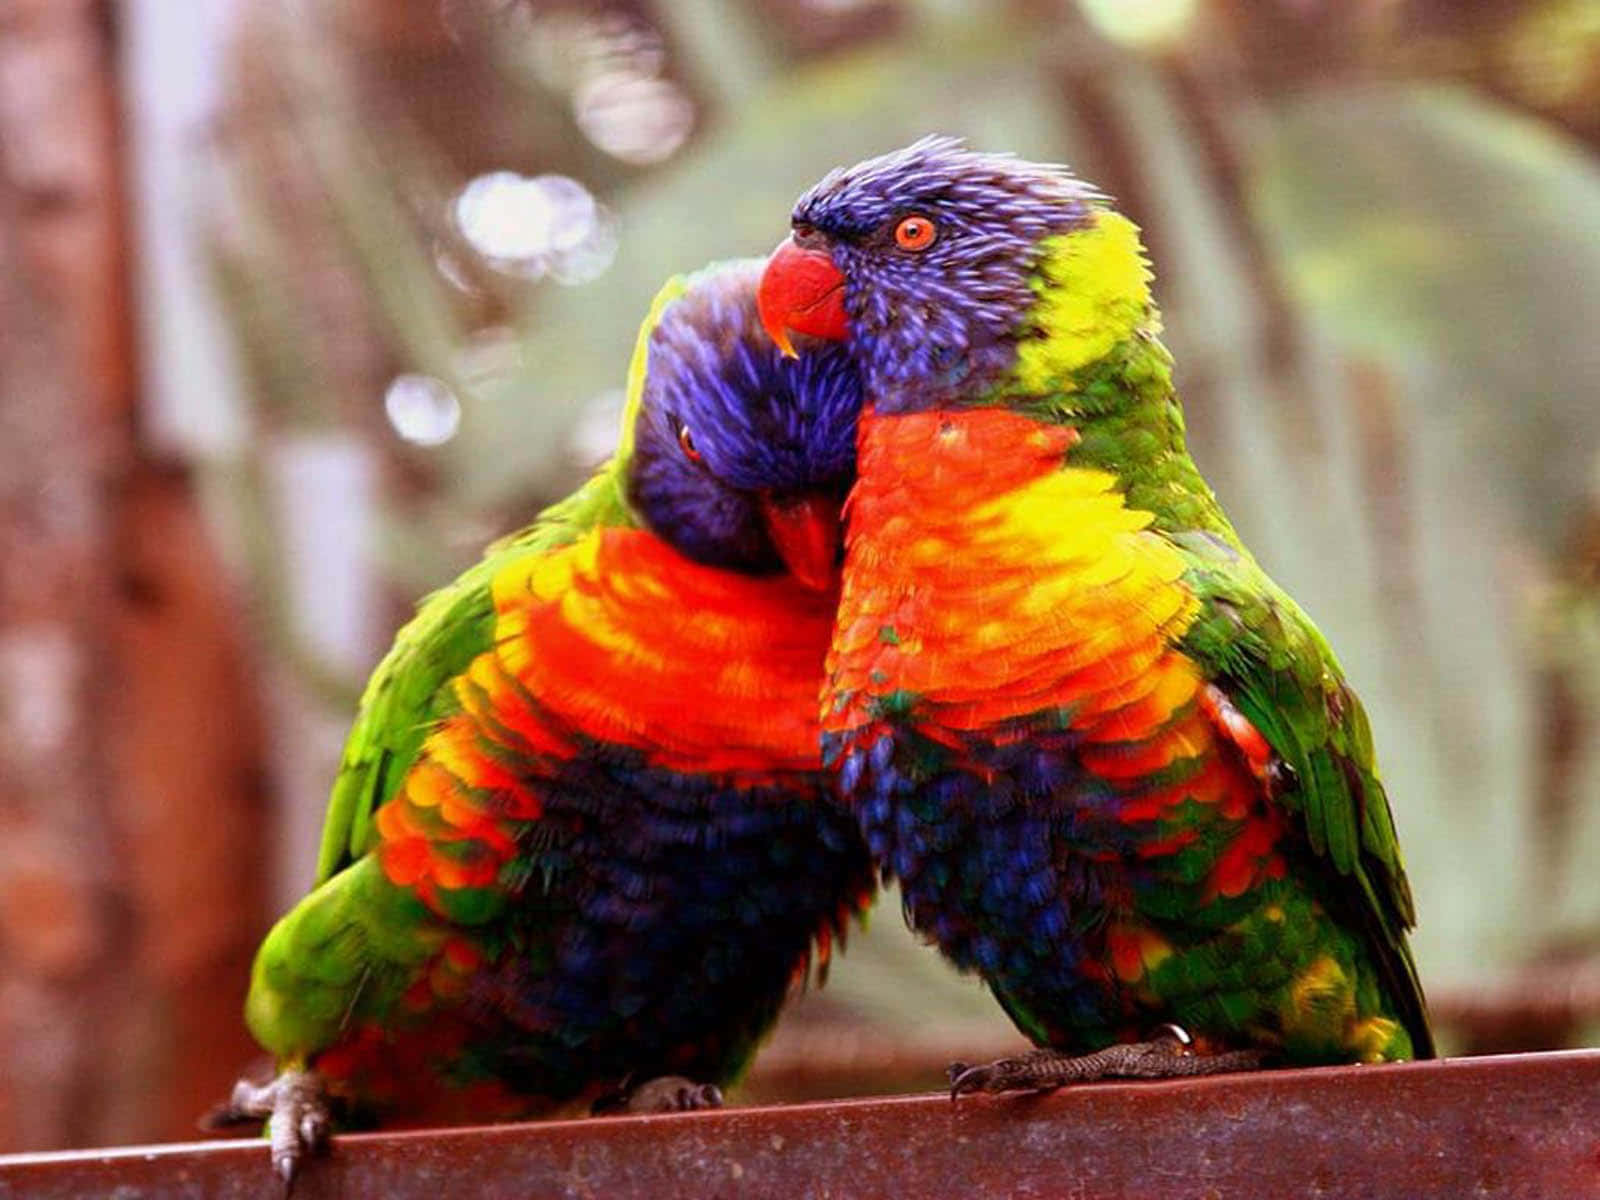 A peaceful moment of two love birds